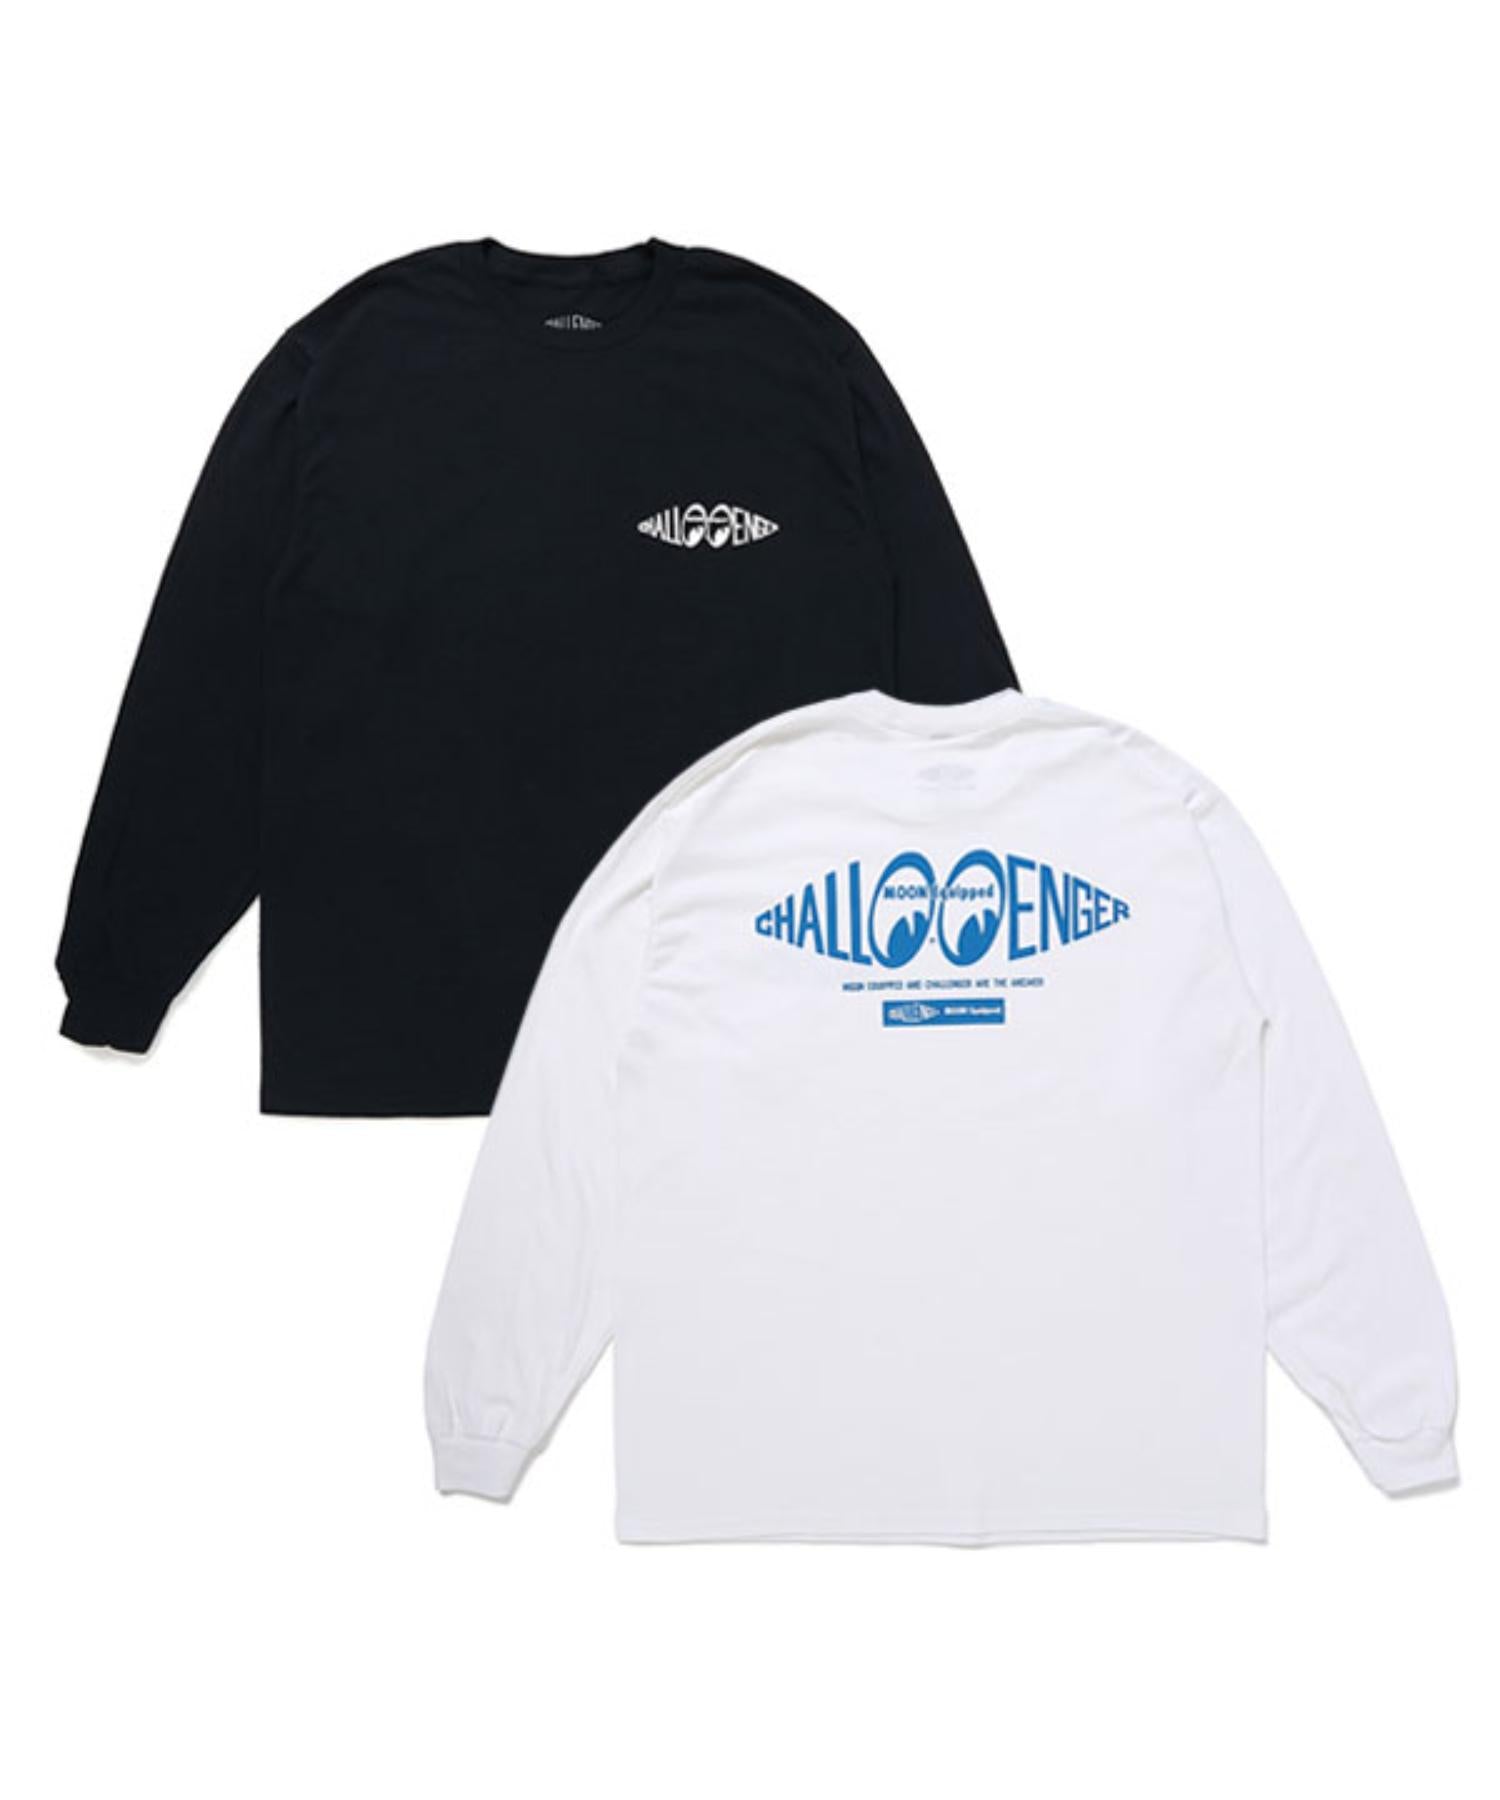 CHALLENGER x MOON Equipped L/S TEE - CHALLENGER